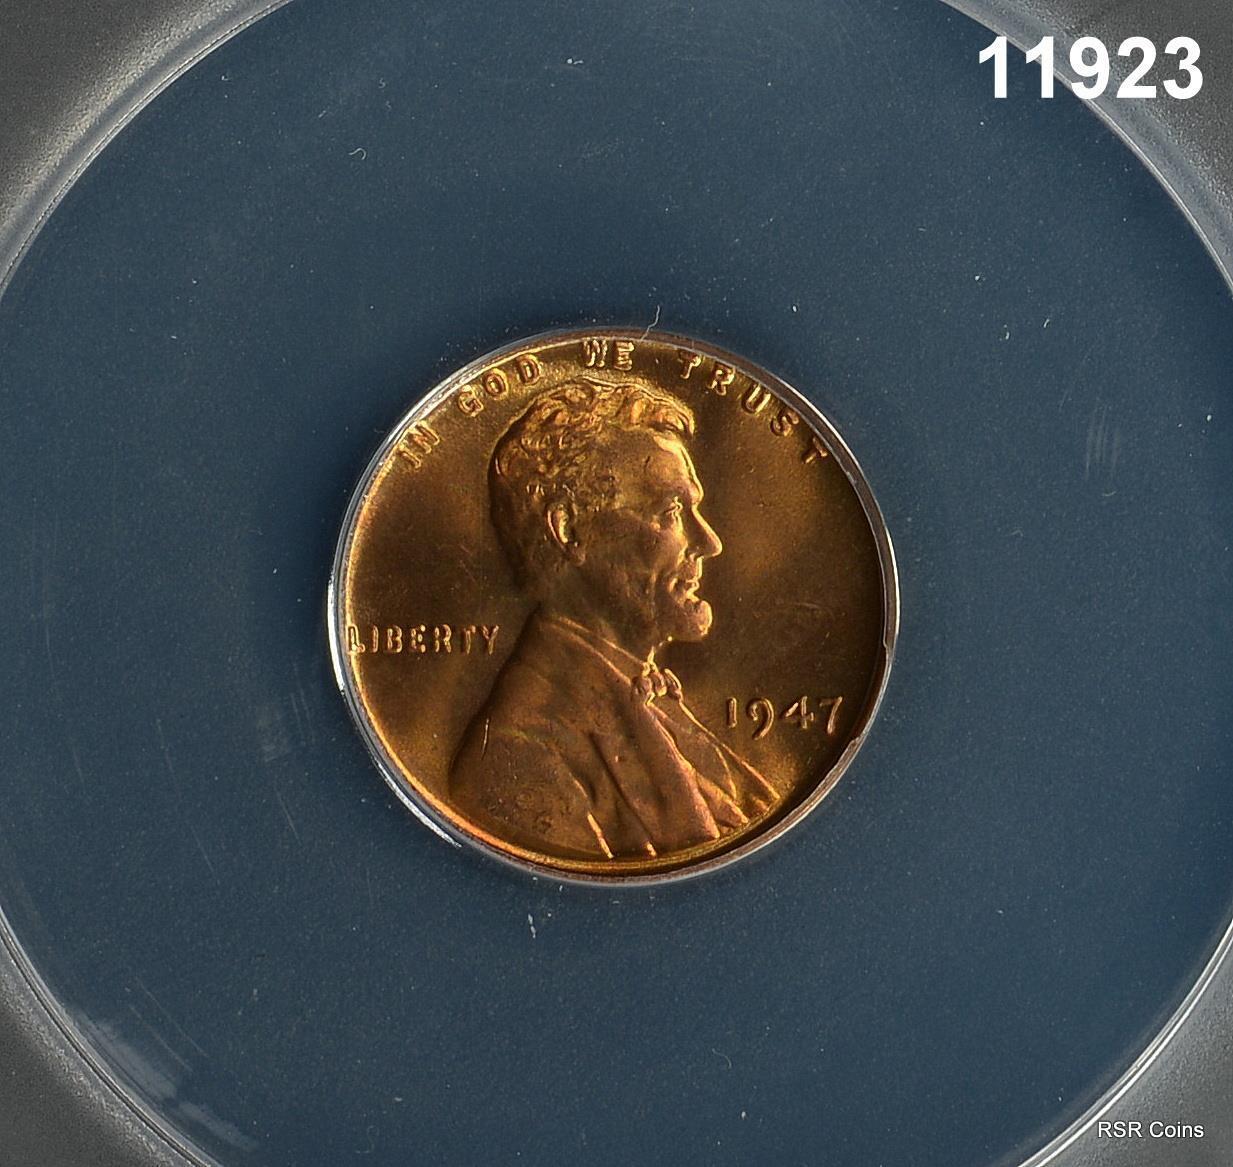 1947 LINCOLN CENT ANACS CERTIFIED MS66 RB LOOKS FULL RED! #11923